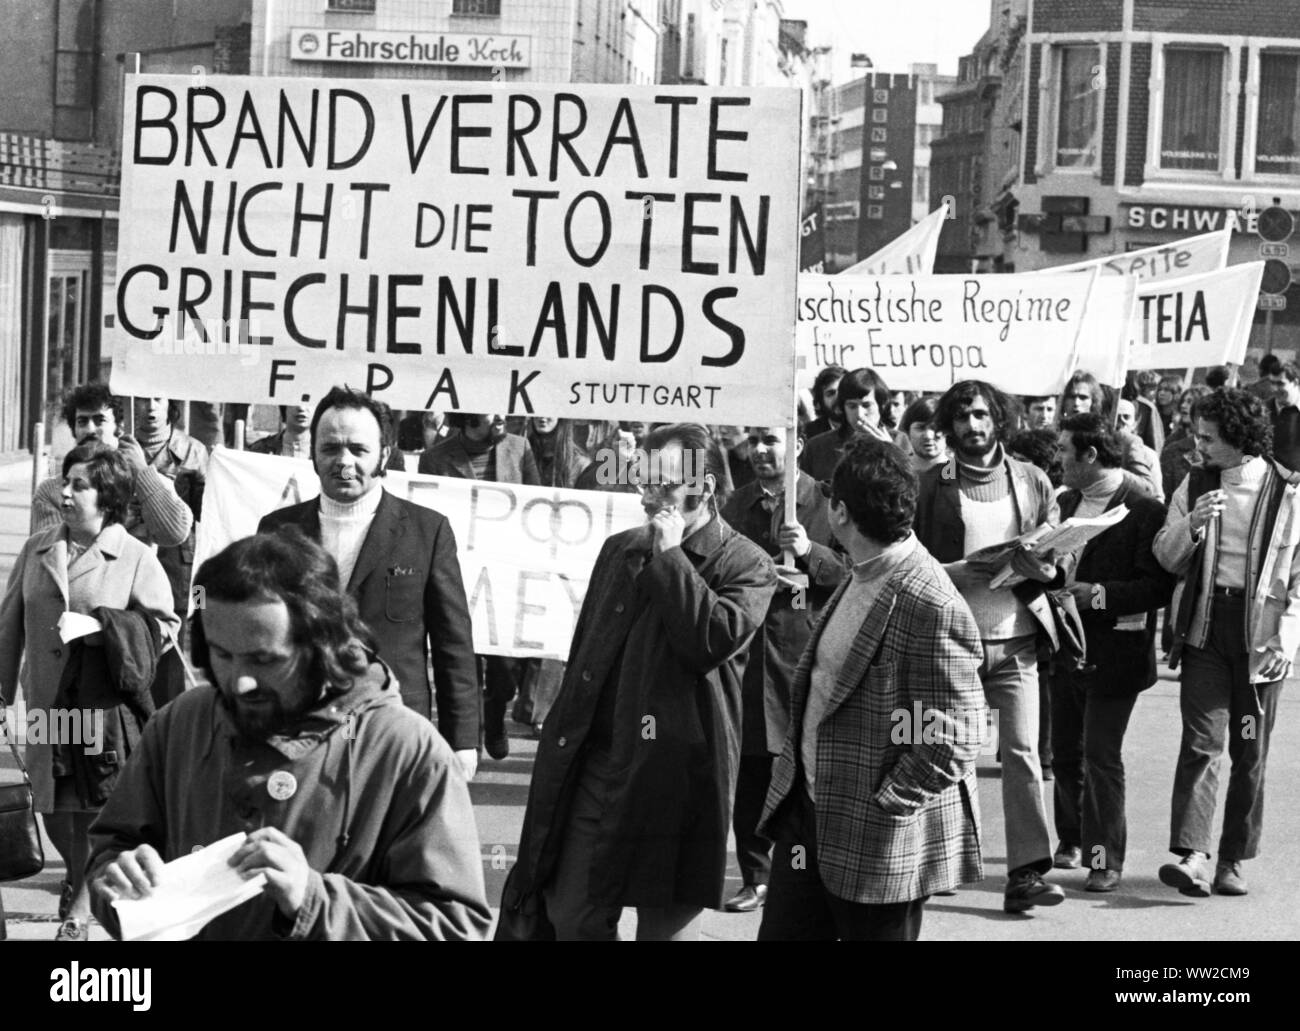 Greeks and Germans demonstrated on March 10, 1973 in Bonn against the Greek military junta and for freedom in Greece. | Greeks and Germans demonstrated on March 10, 1973 in Bonn against